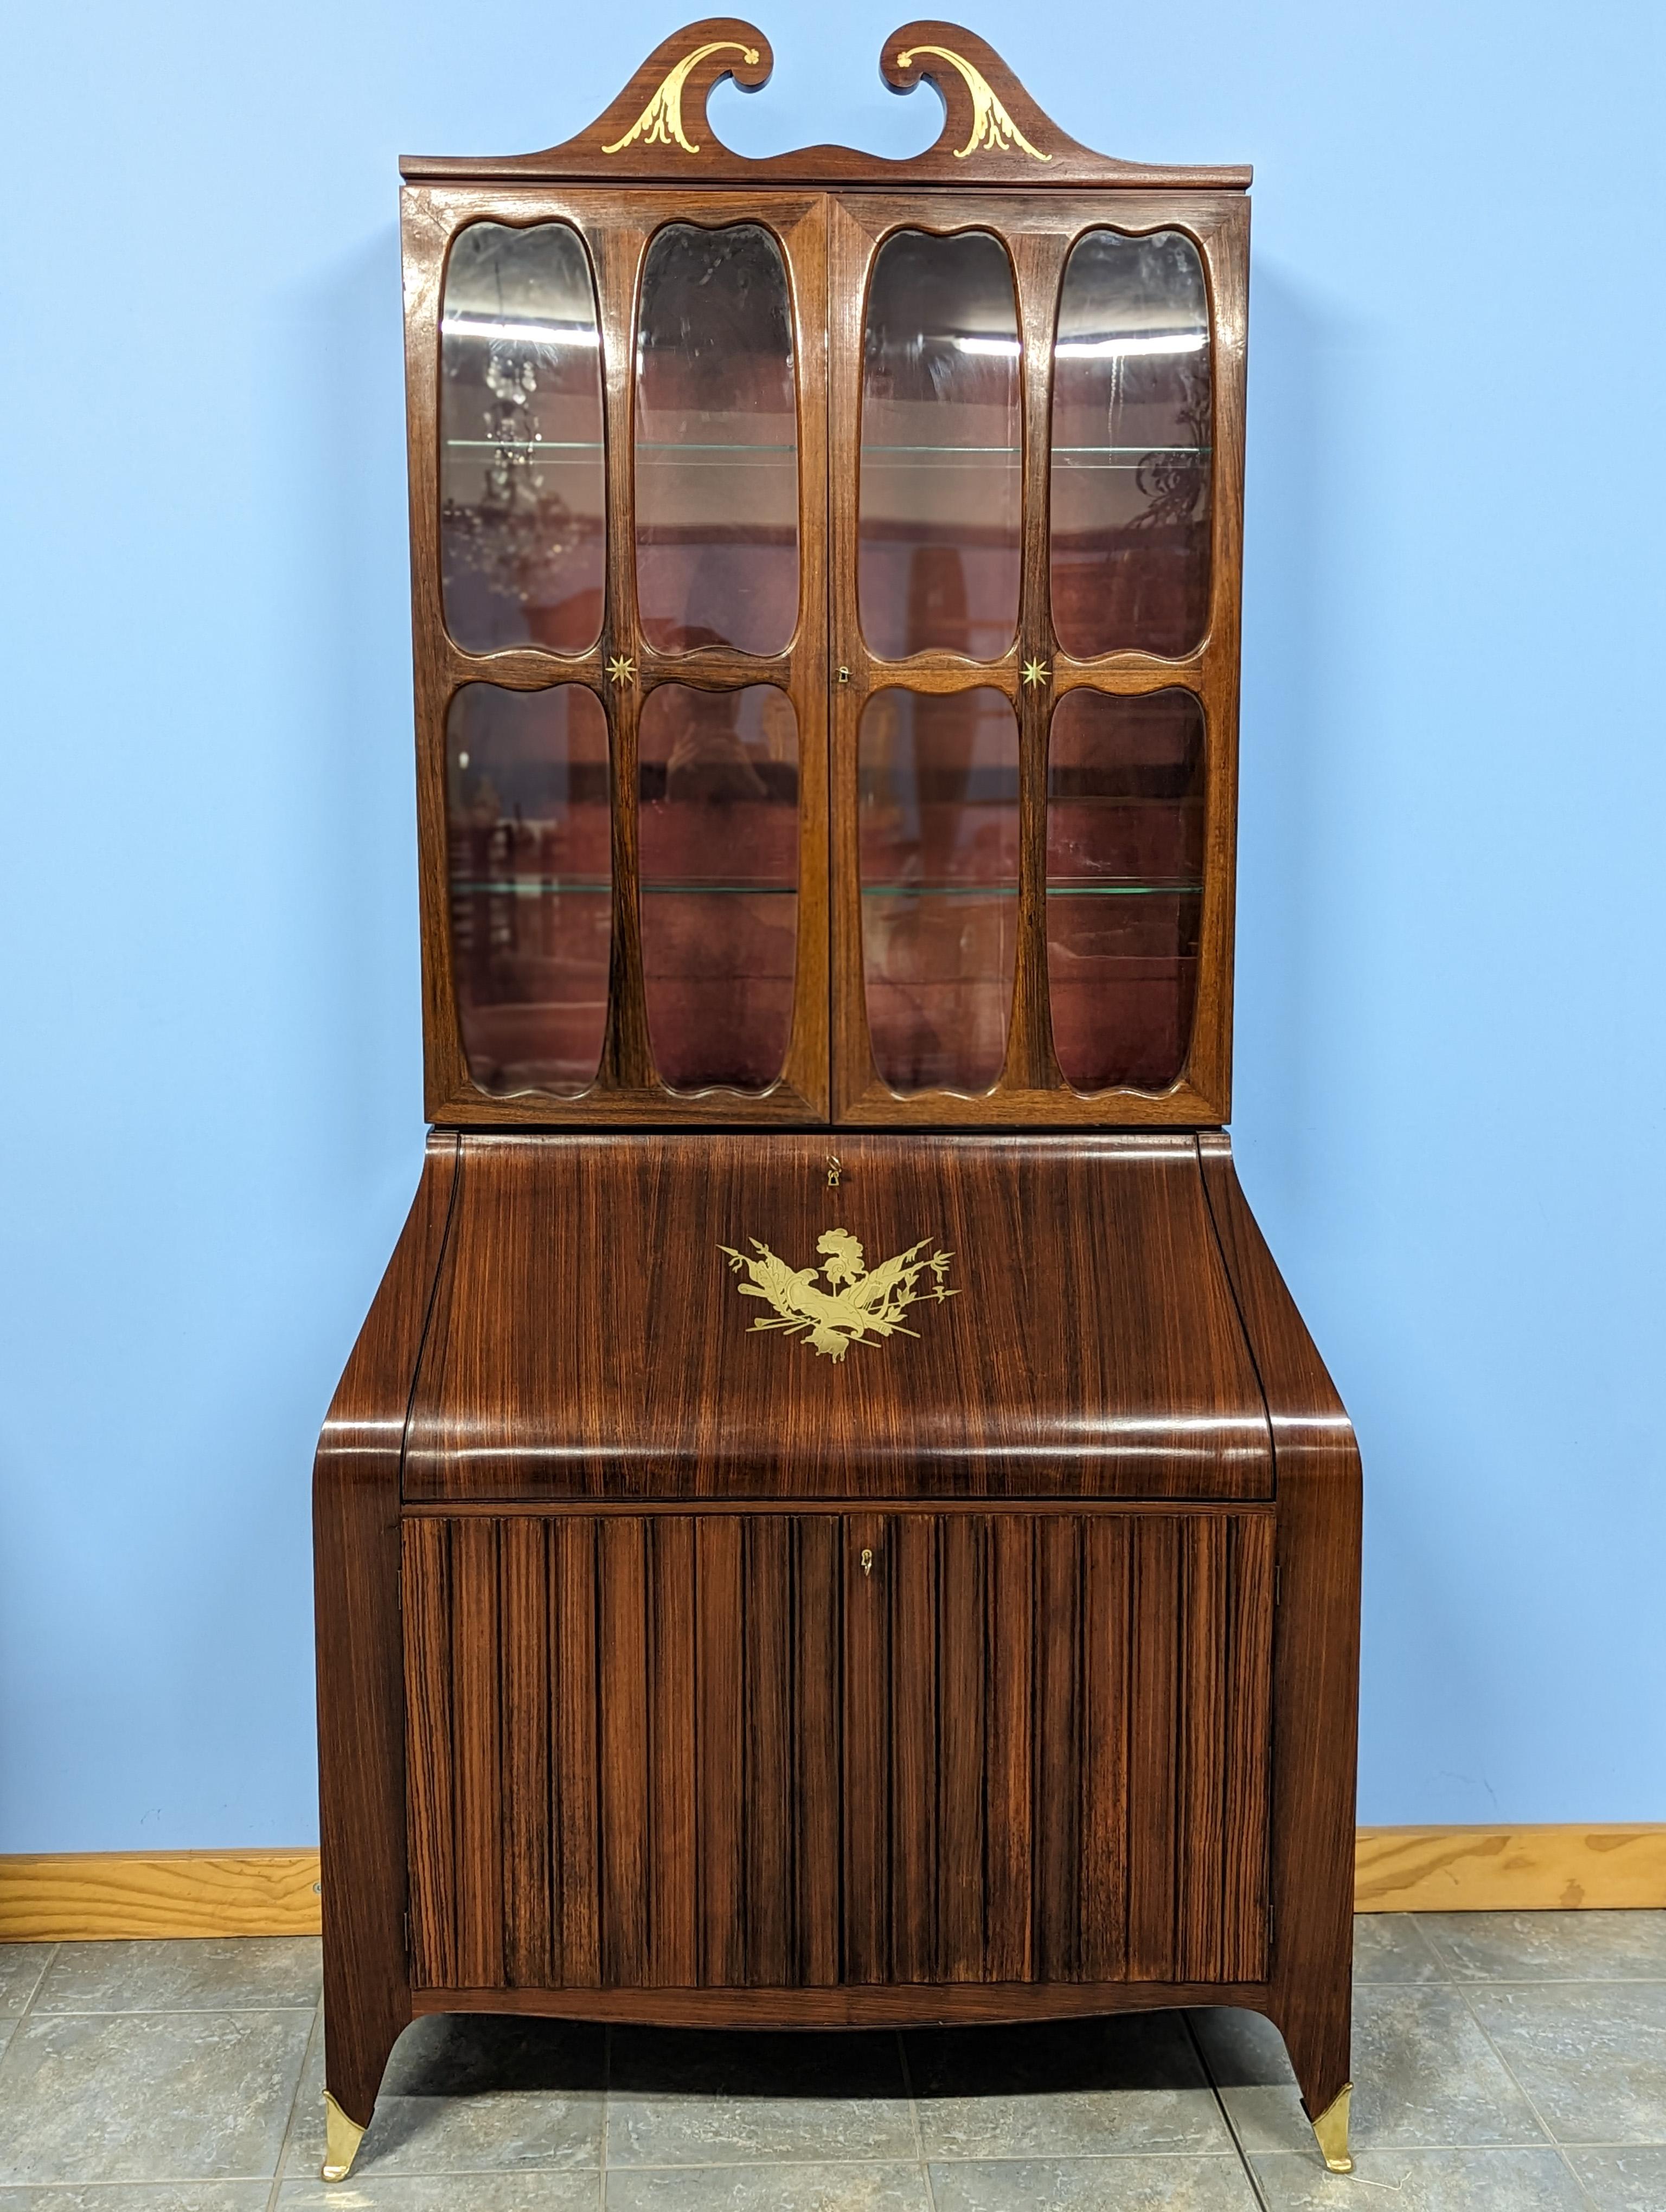 This exquisite Mahogany trumeau boasts a stunning design, featuring two doors at the base, along with an upper section that includes a showcase with two doors, a central connecting part with a flap door and an internal citronnier secretaire. The